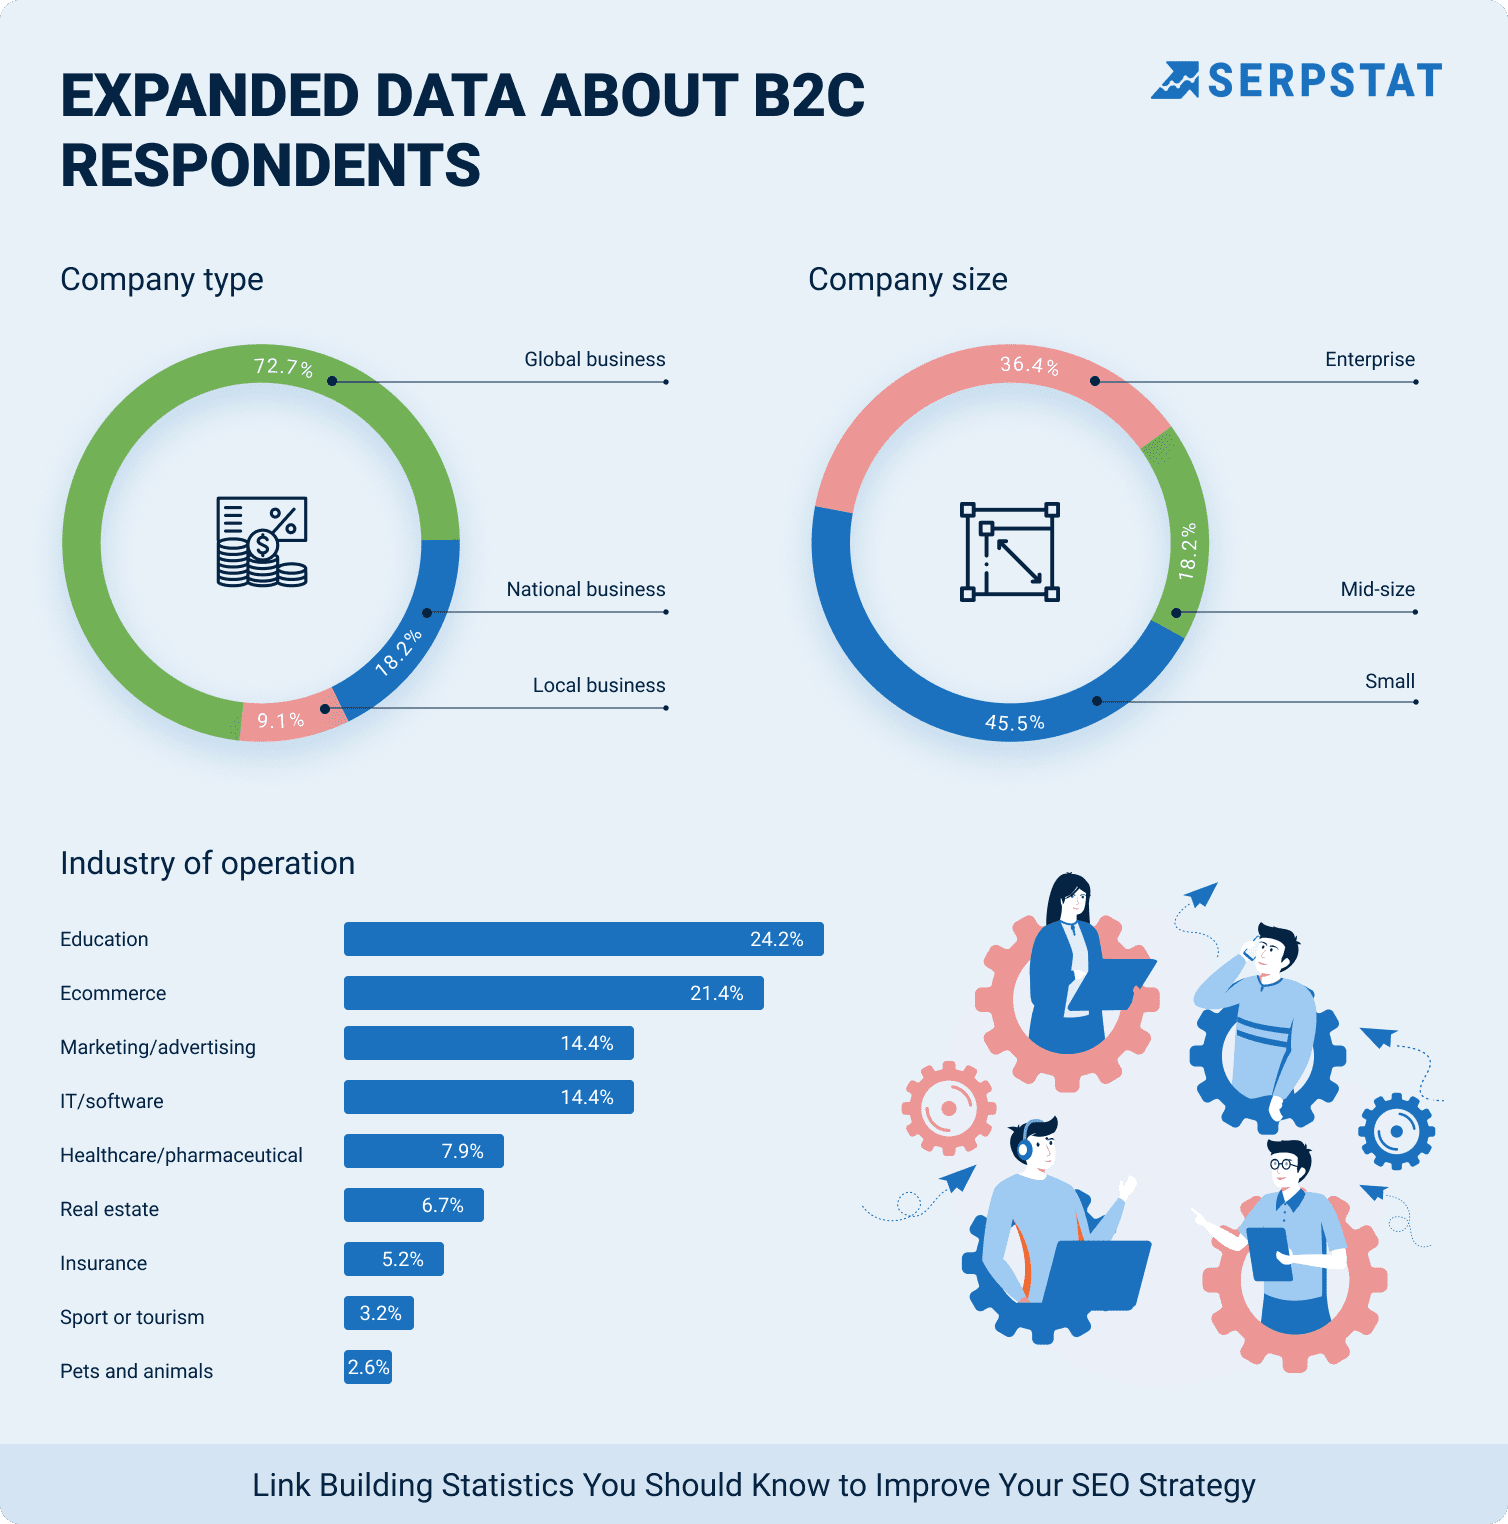 Expanded data about B2C respondents